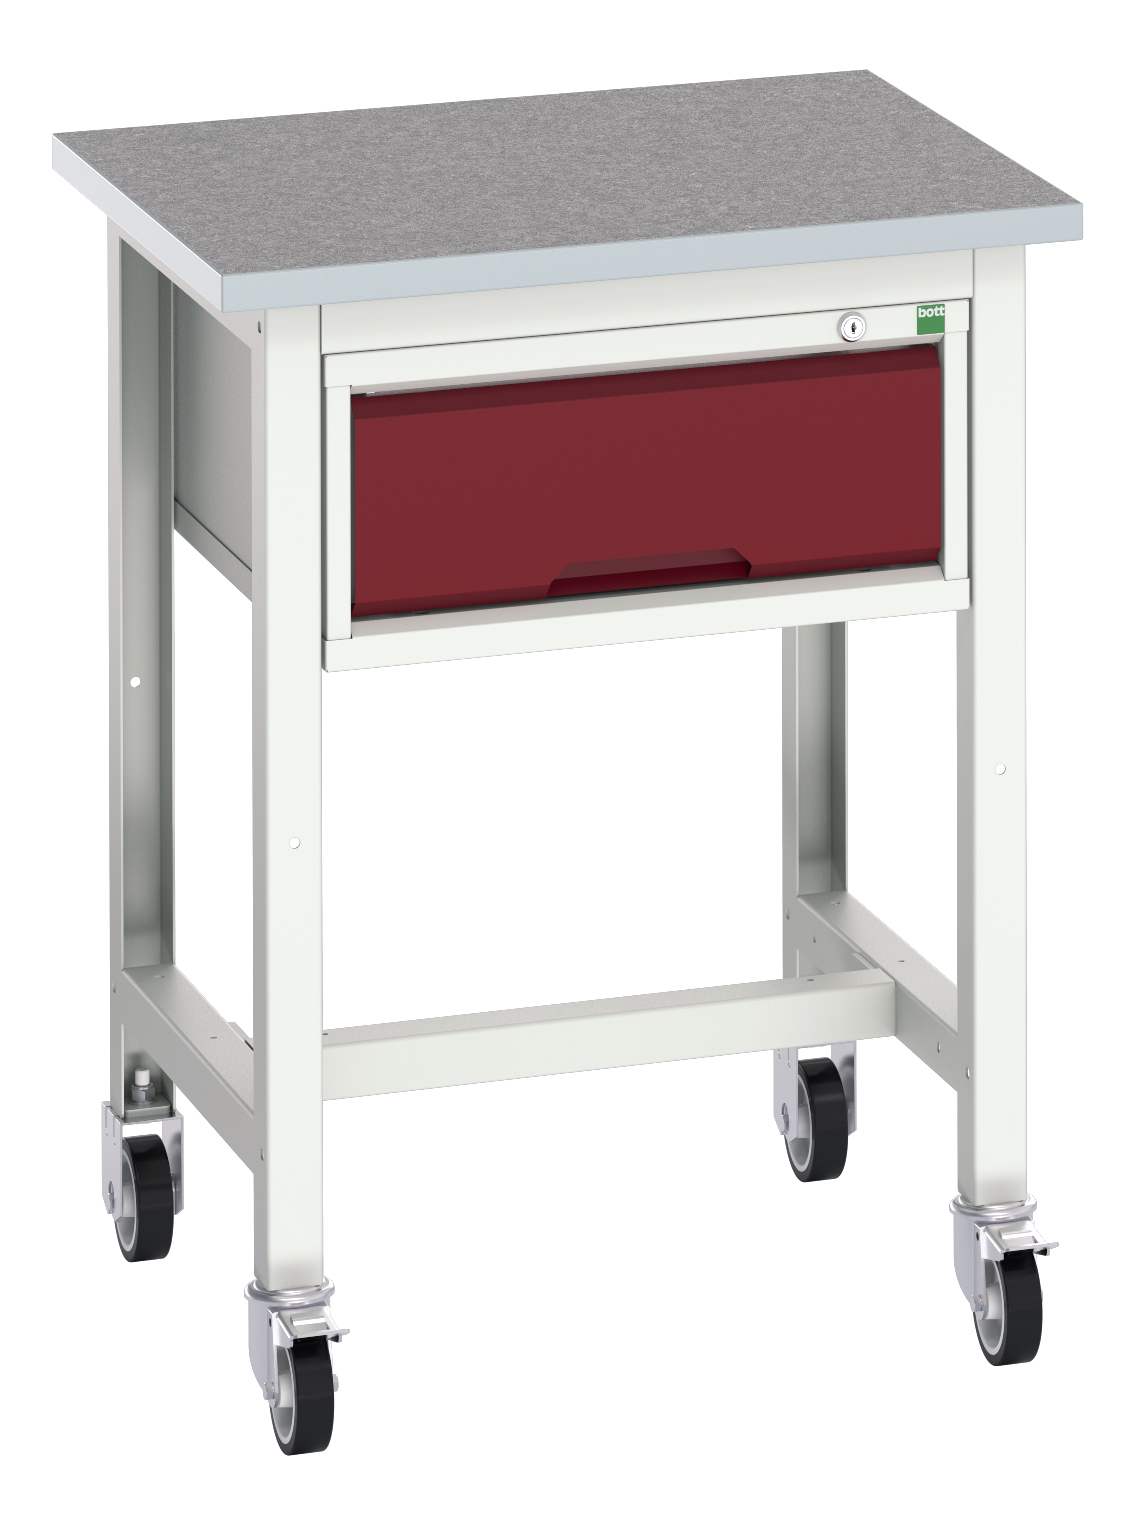 Bott Verso Mobile Workstand With 1 Drawer Cabinet - 16922201.24